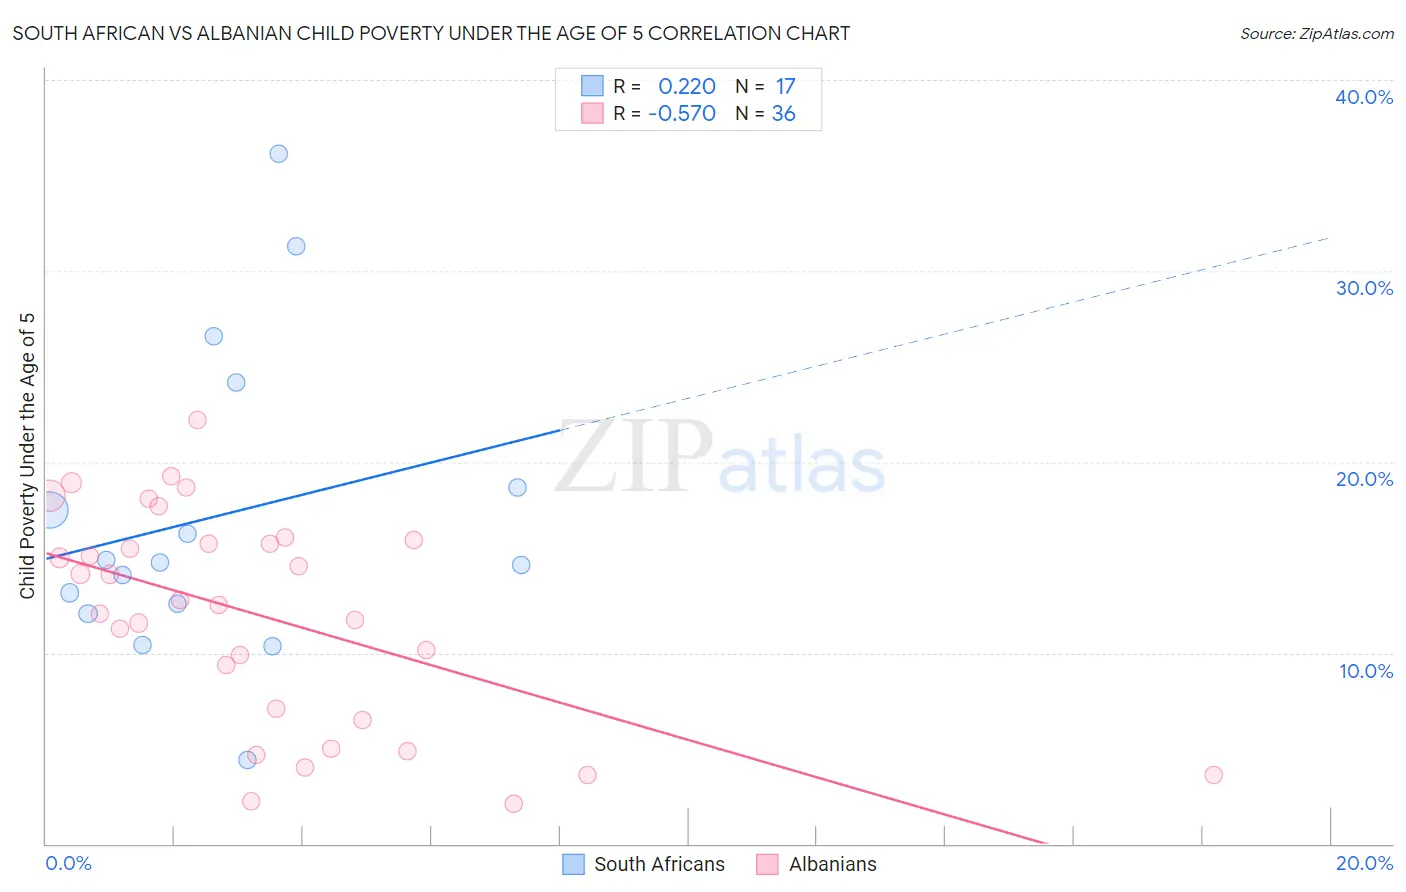 South African vs Albanian Child Poverty Under the Age of 5